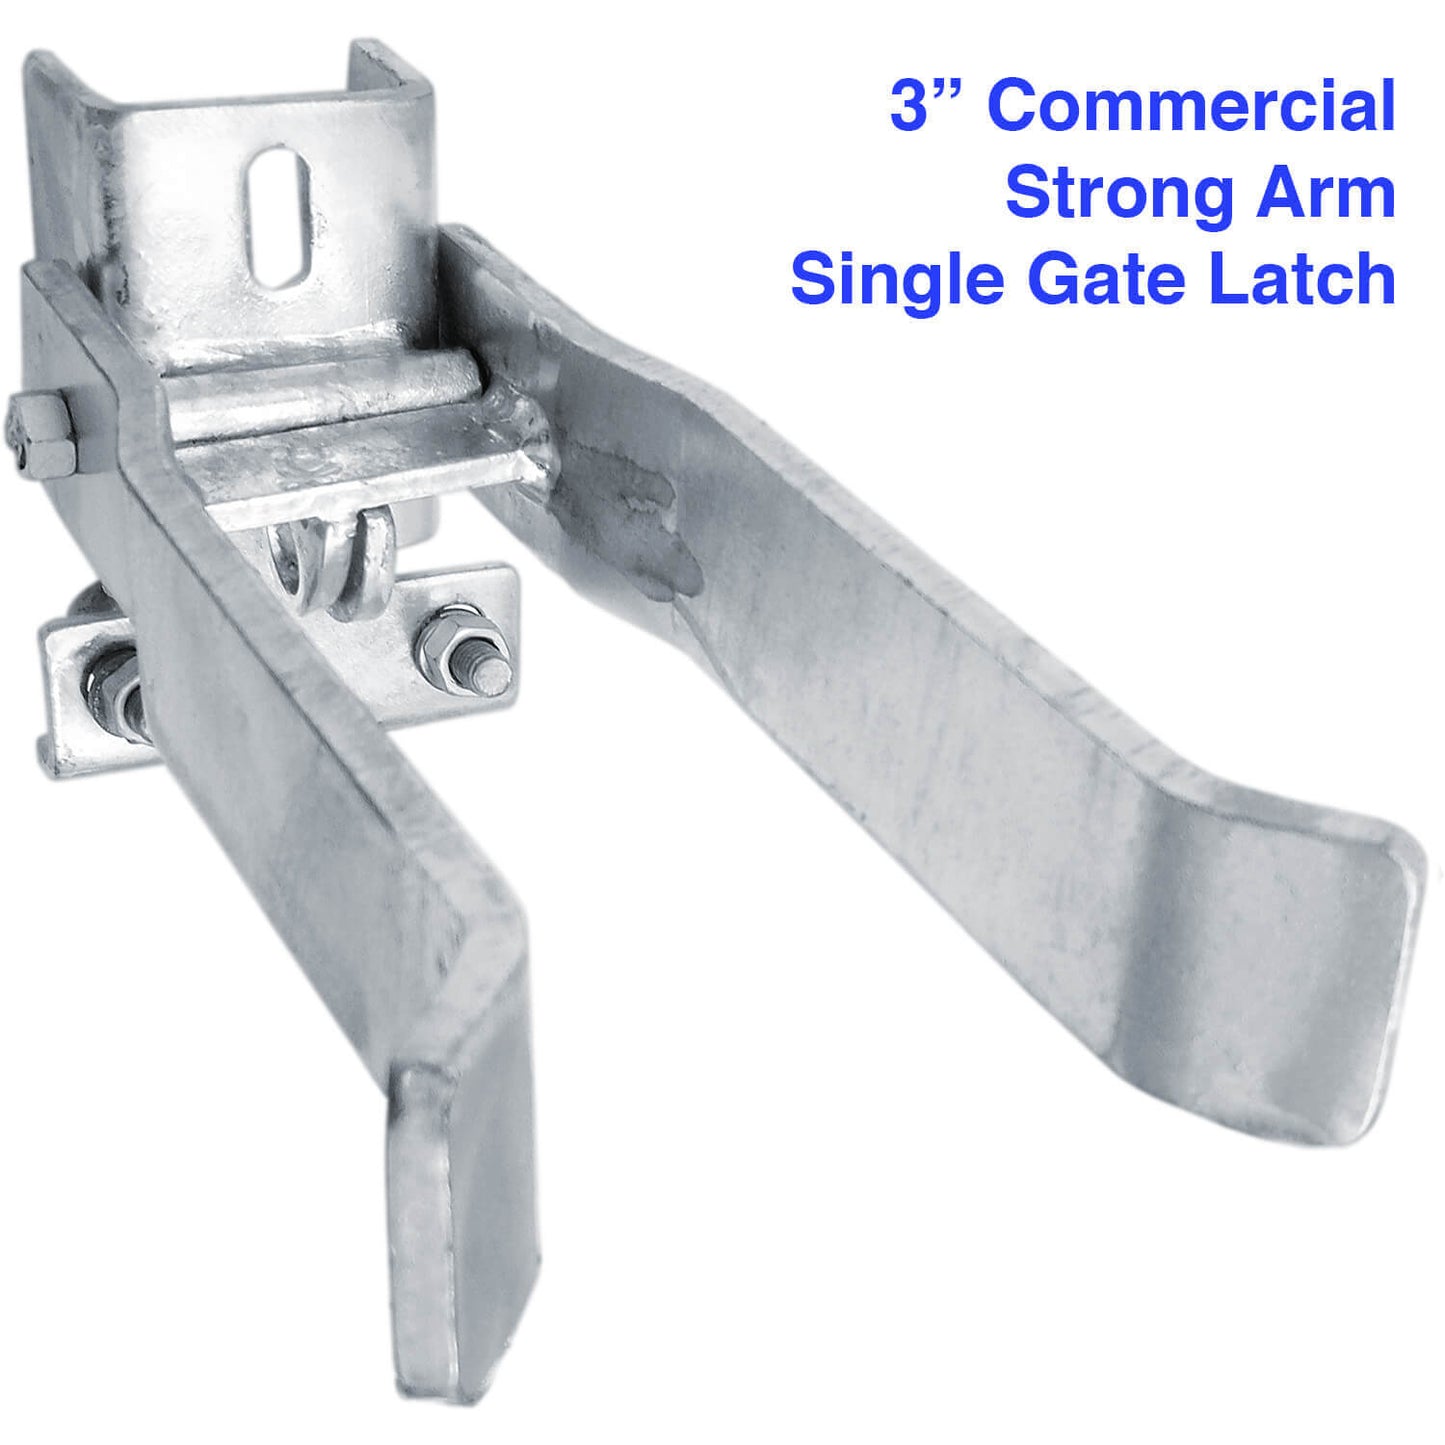 Commercial SINGLE GATE STRONG ARM Latch for Chain Link or Round Pipe Gate Frames. Single Gate FULCRUM Latch Fits 1-5/8" or 1-7/8" Gate Frame